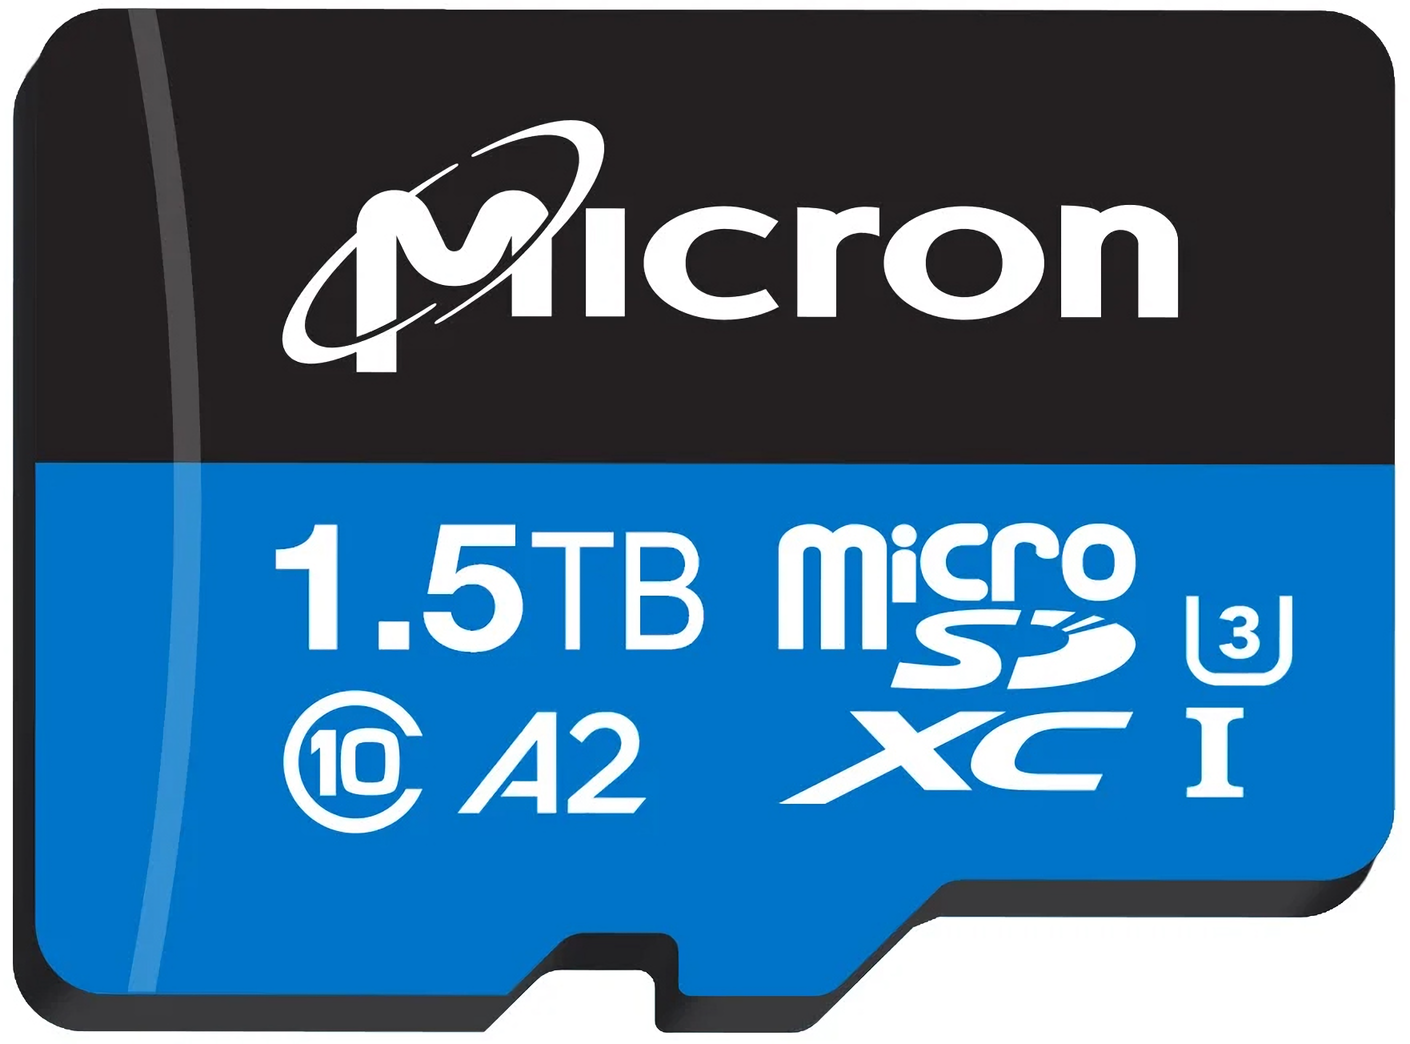 Micron lays claim to the world's largest microSD card at 1.5TB